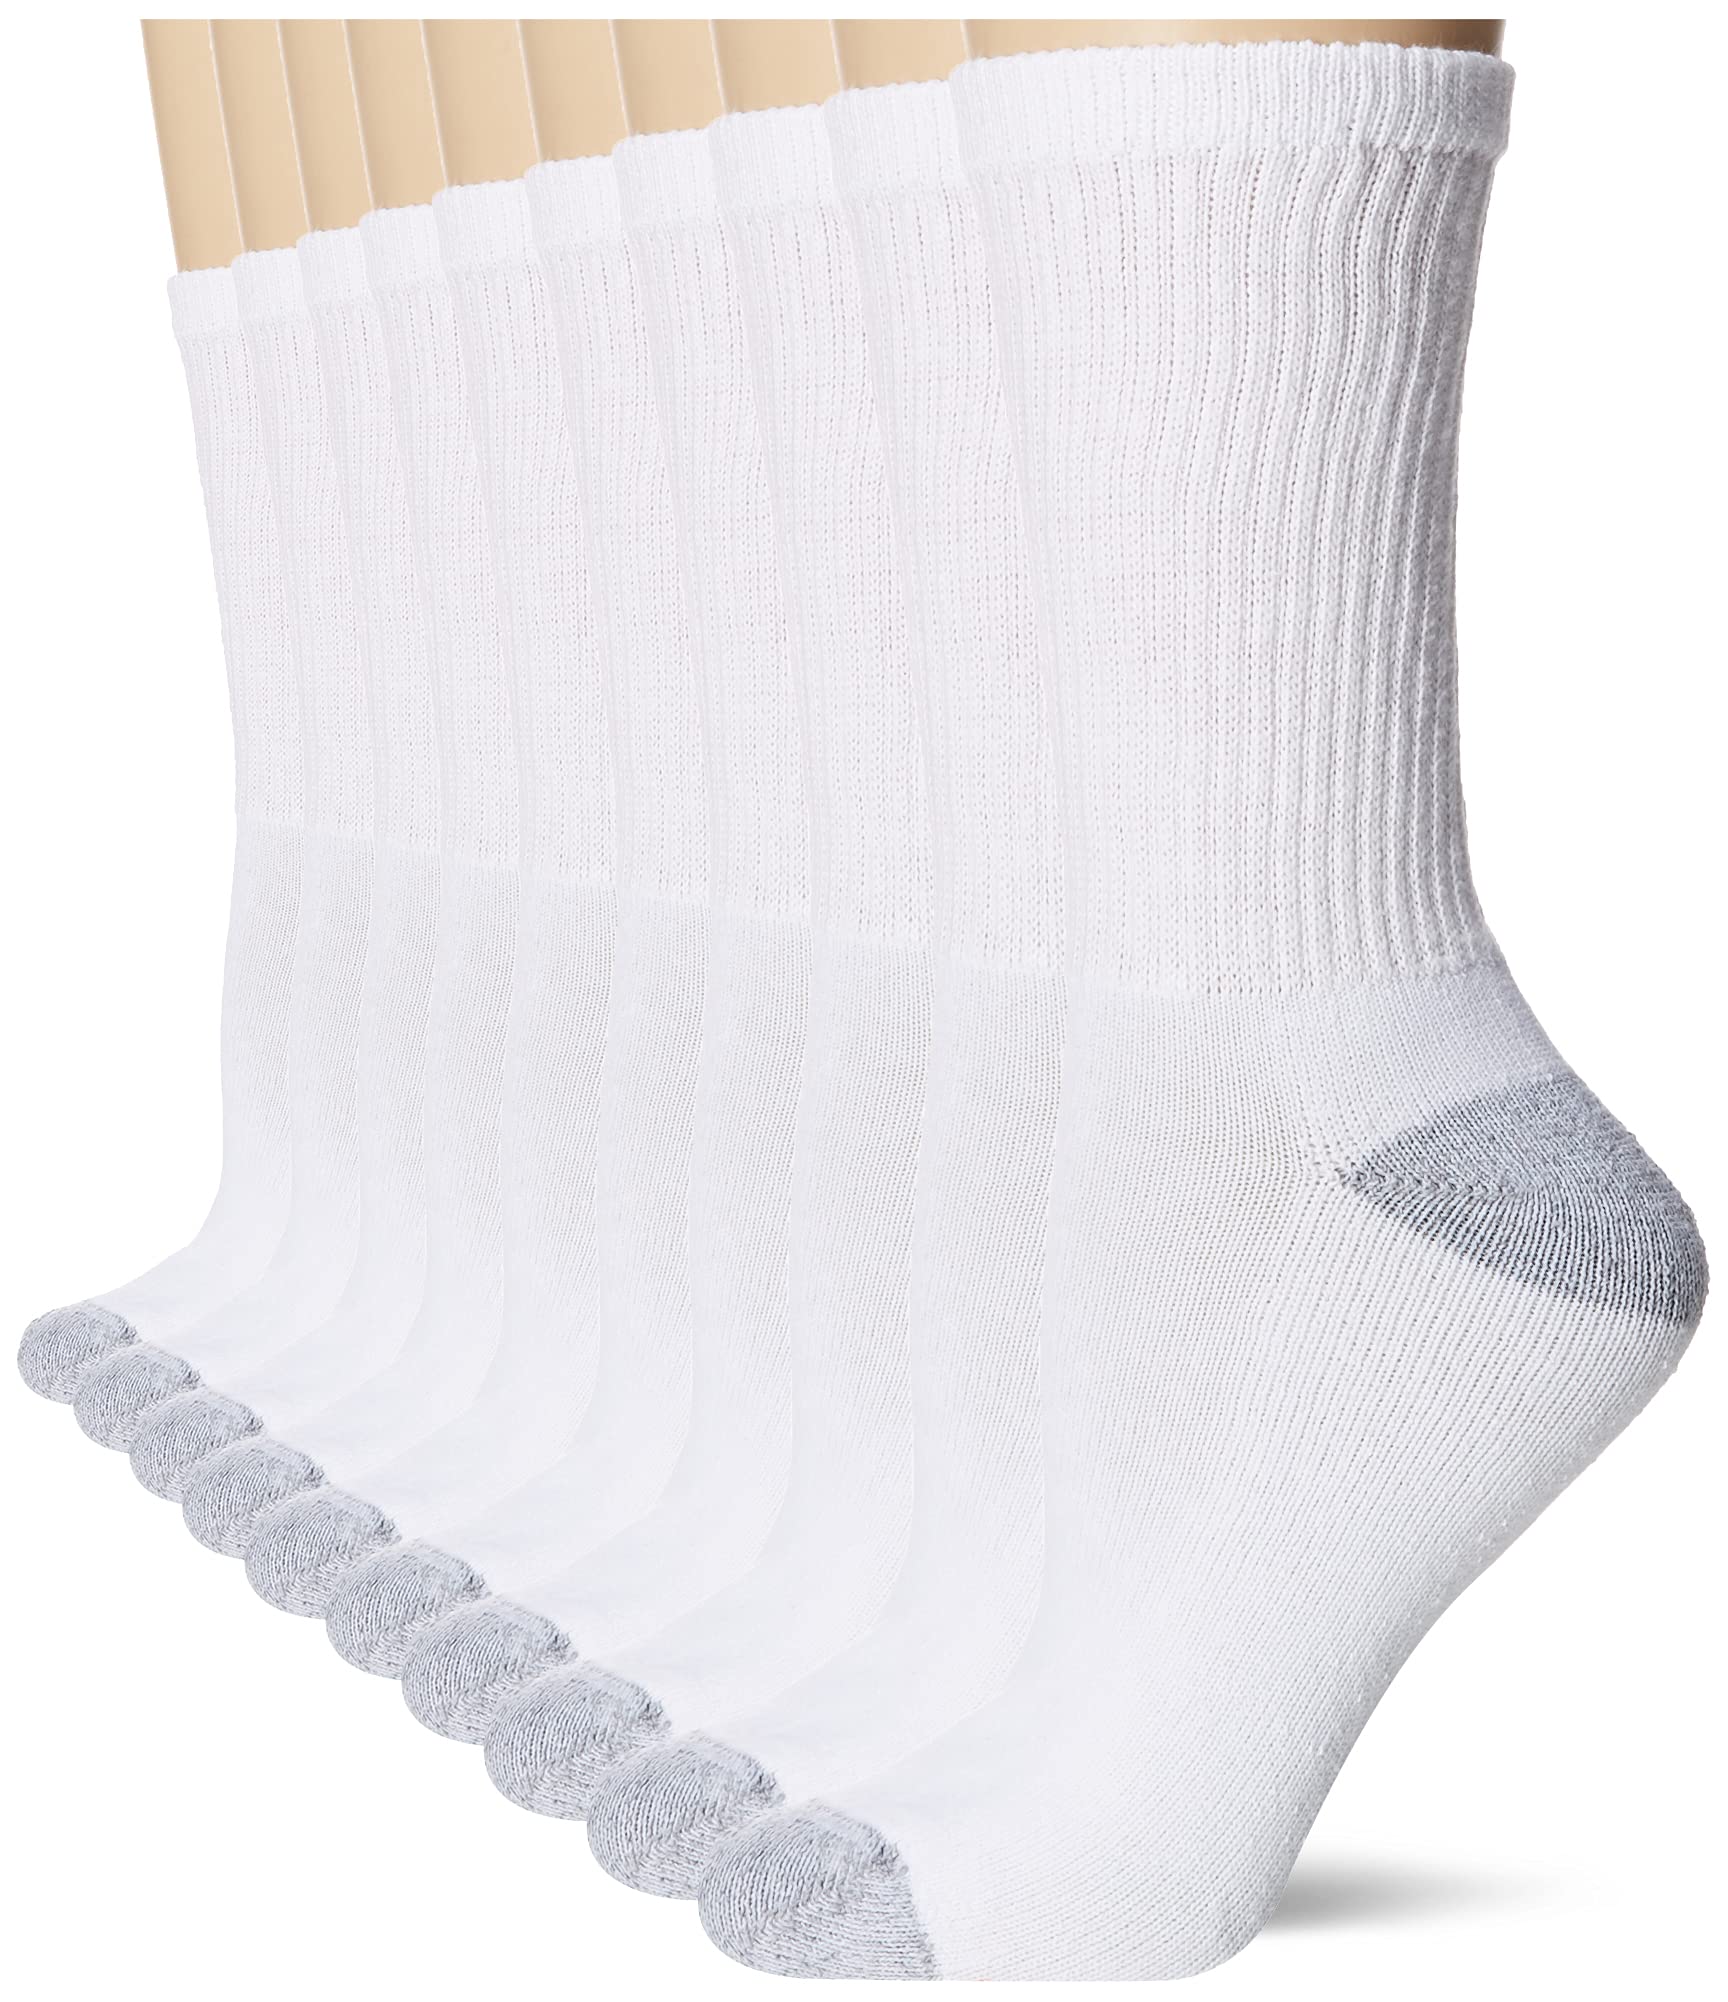 Hanes Women's Value, Crew Soft Moisture-Wicking Socks, Available in 10 and 14-Packs